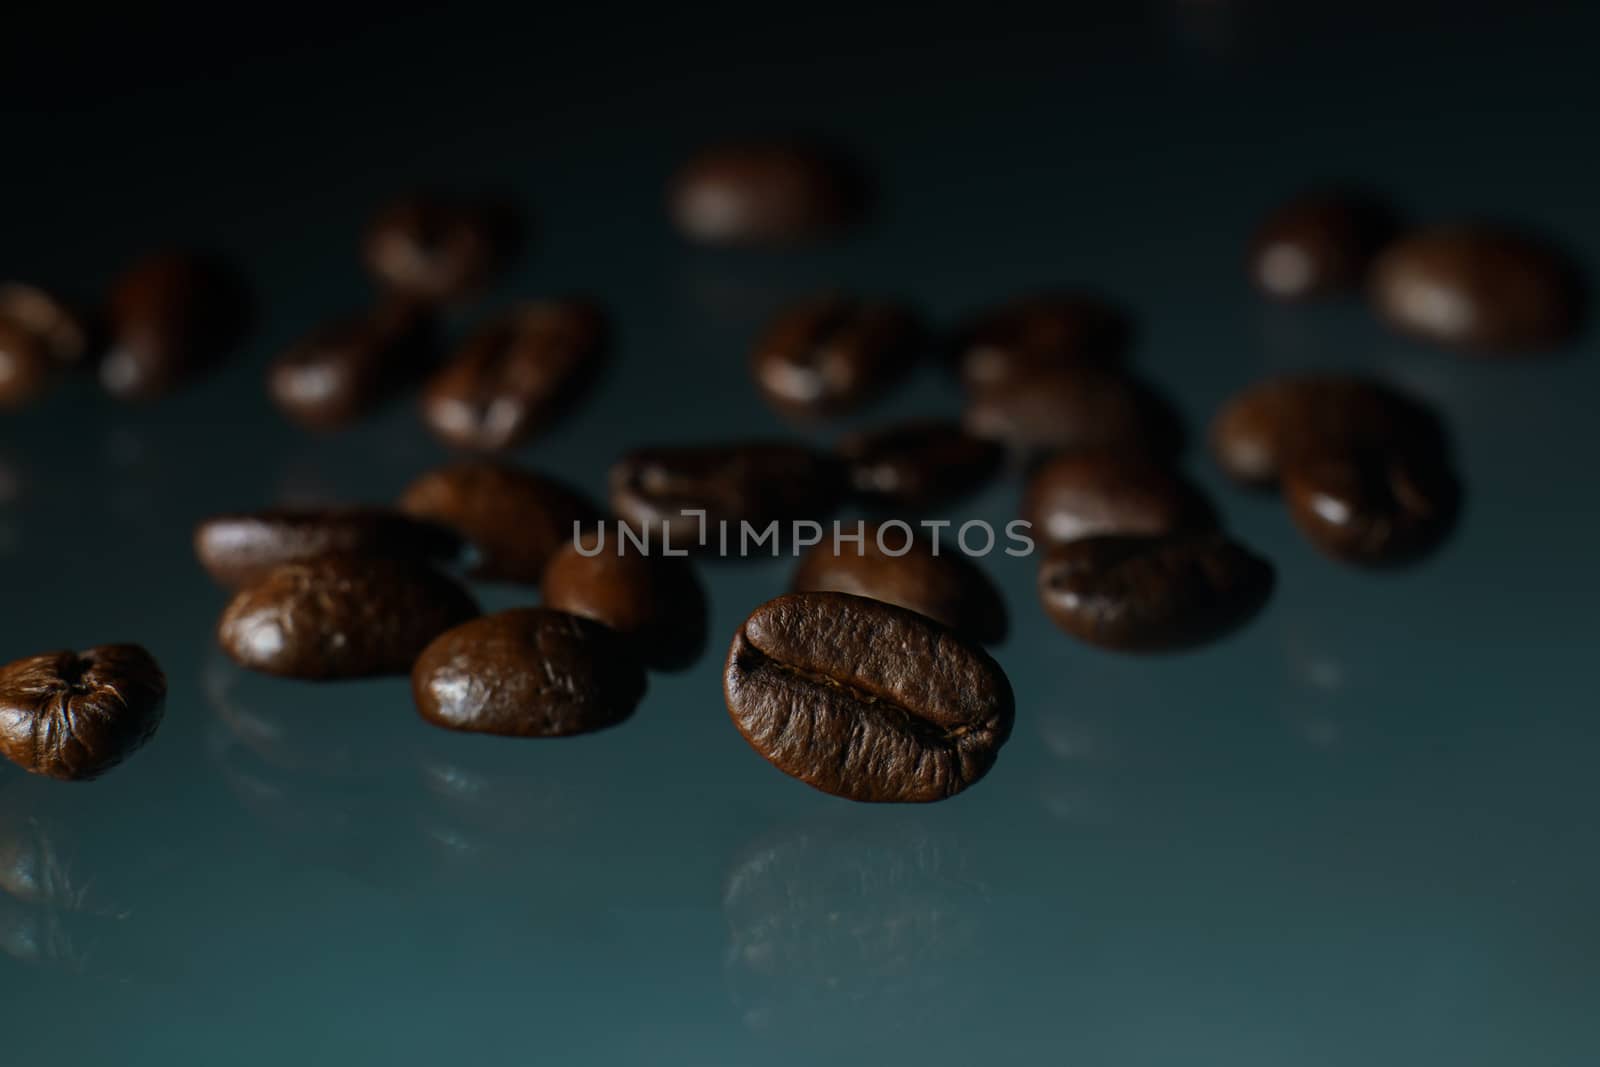 Roasted coffee beans pile on glass reflection background.